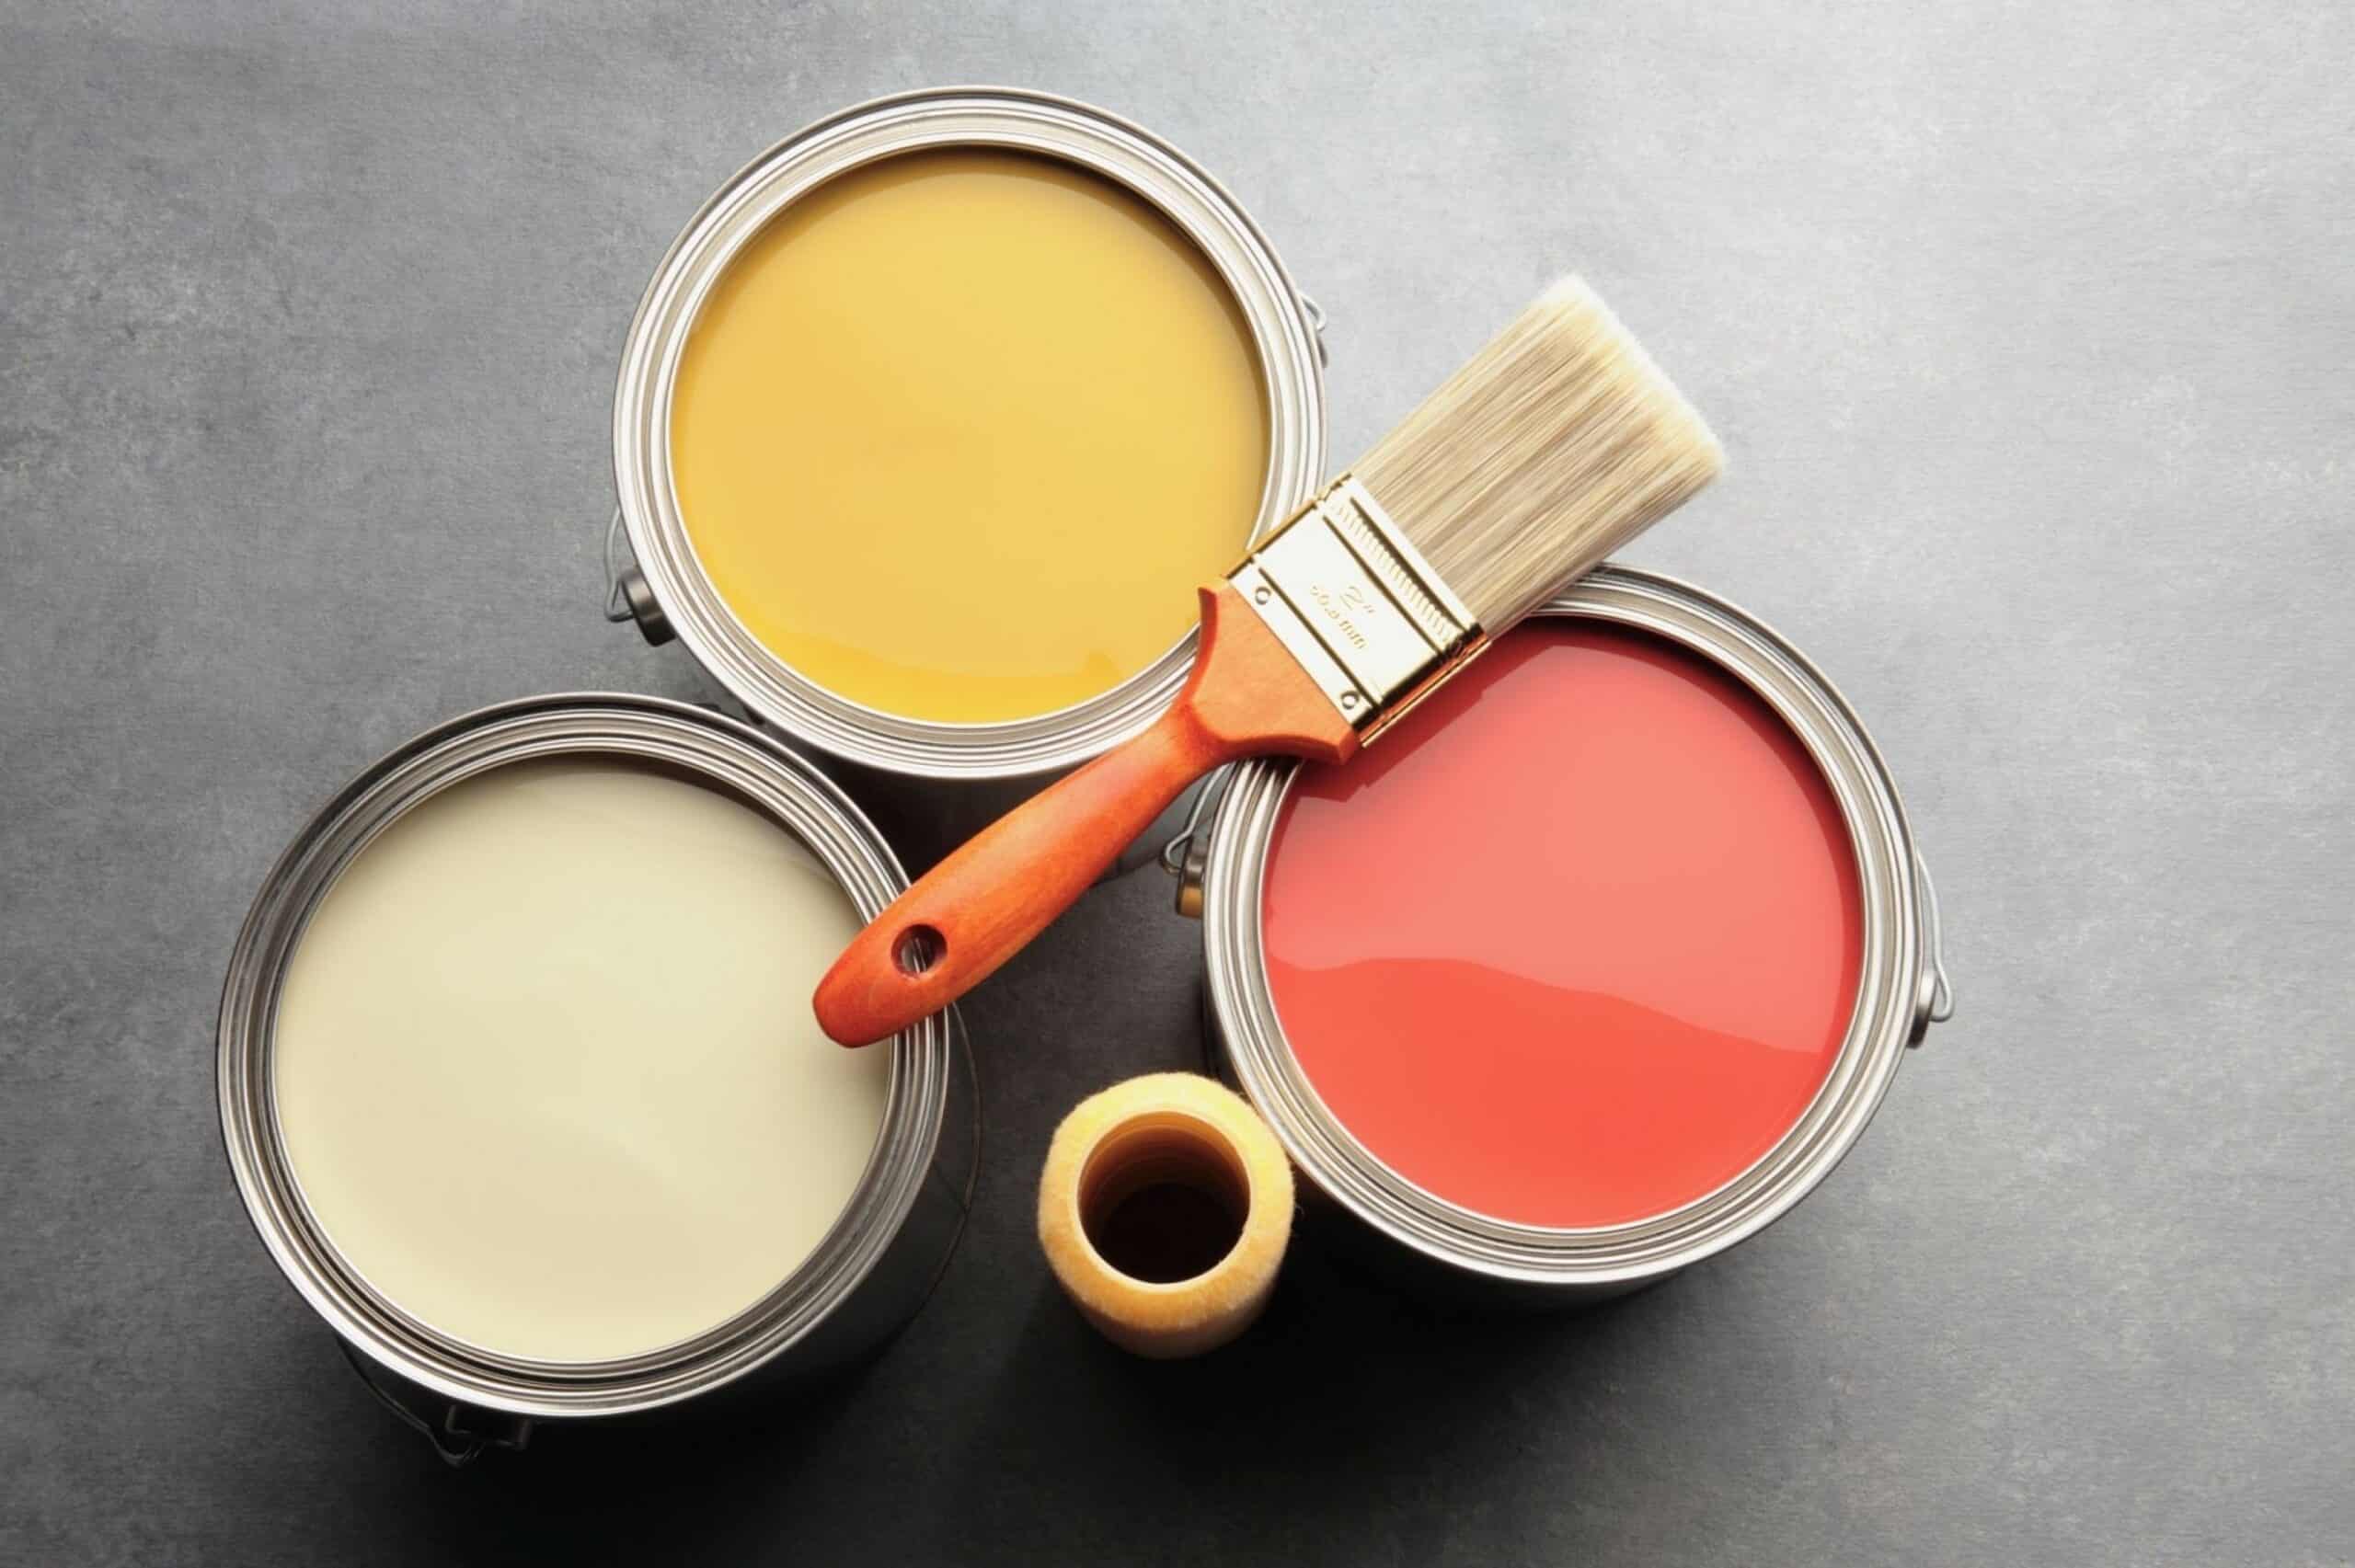 How to Get Rid of Paint Smell Tidyhere Image of Three Paint Cans with Brush and Roller